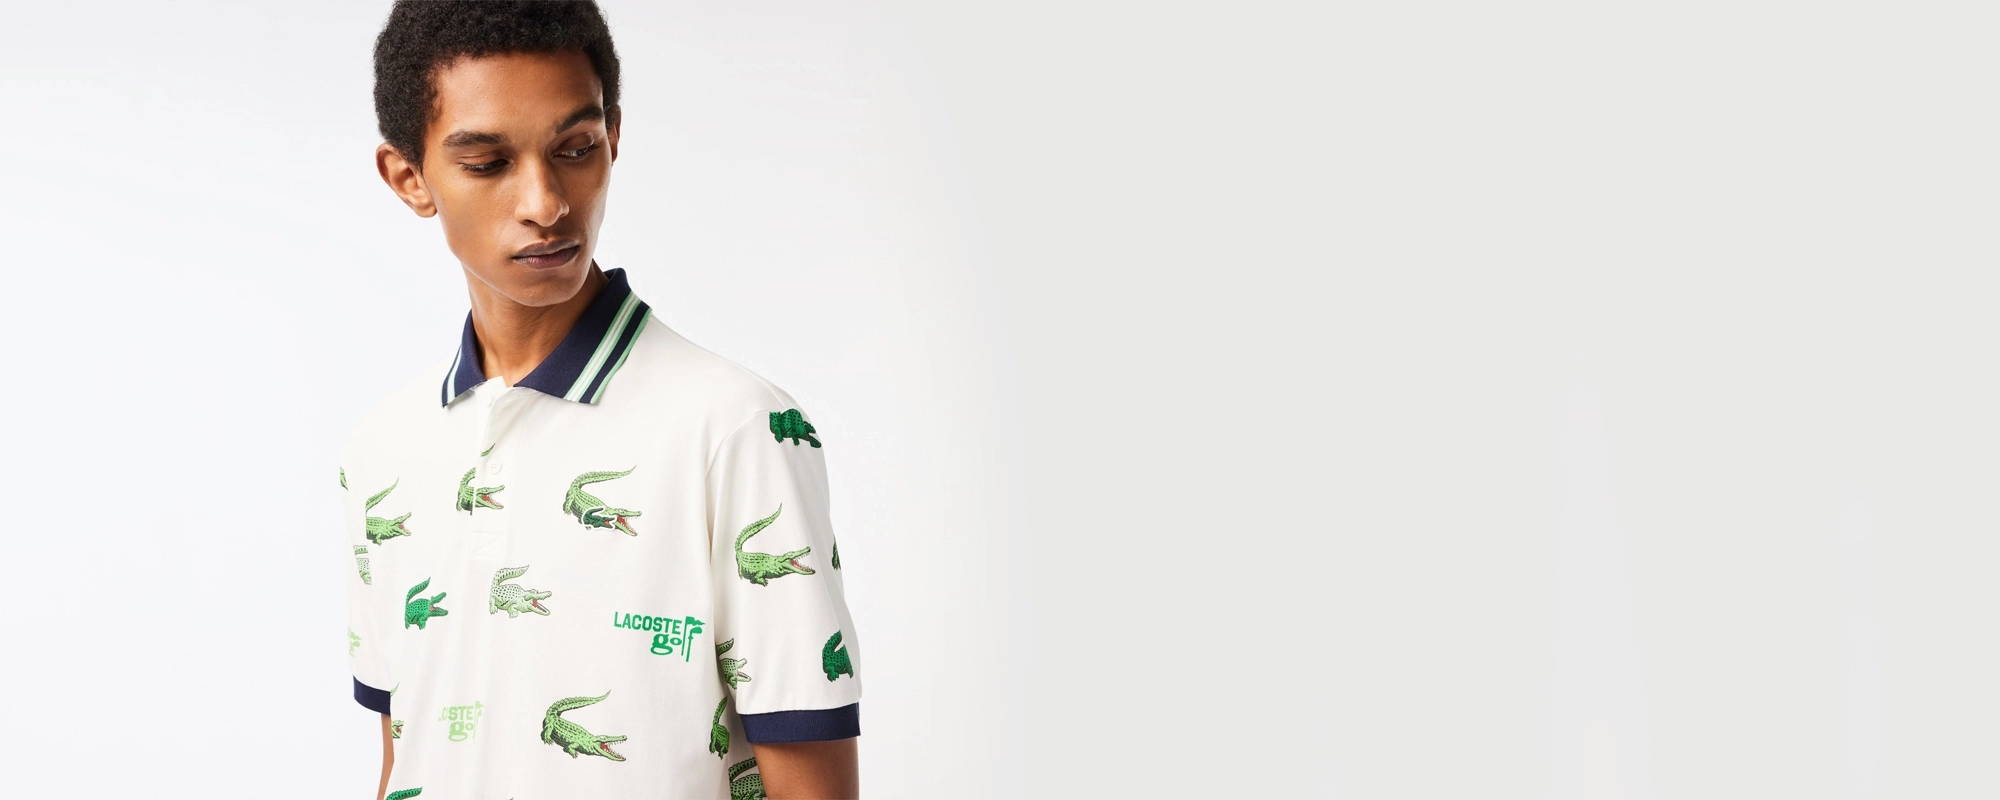 Lacoste Golf Clothing